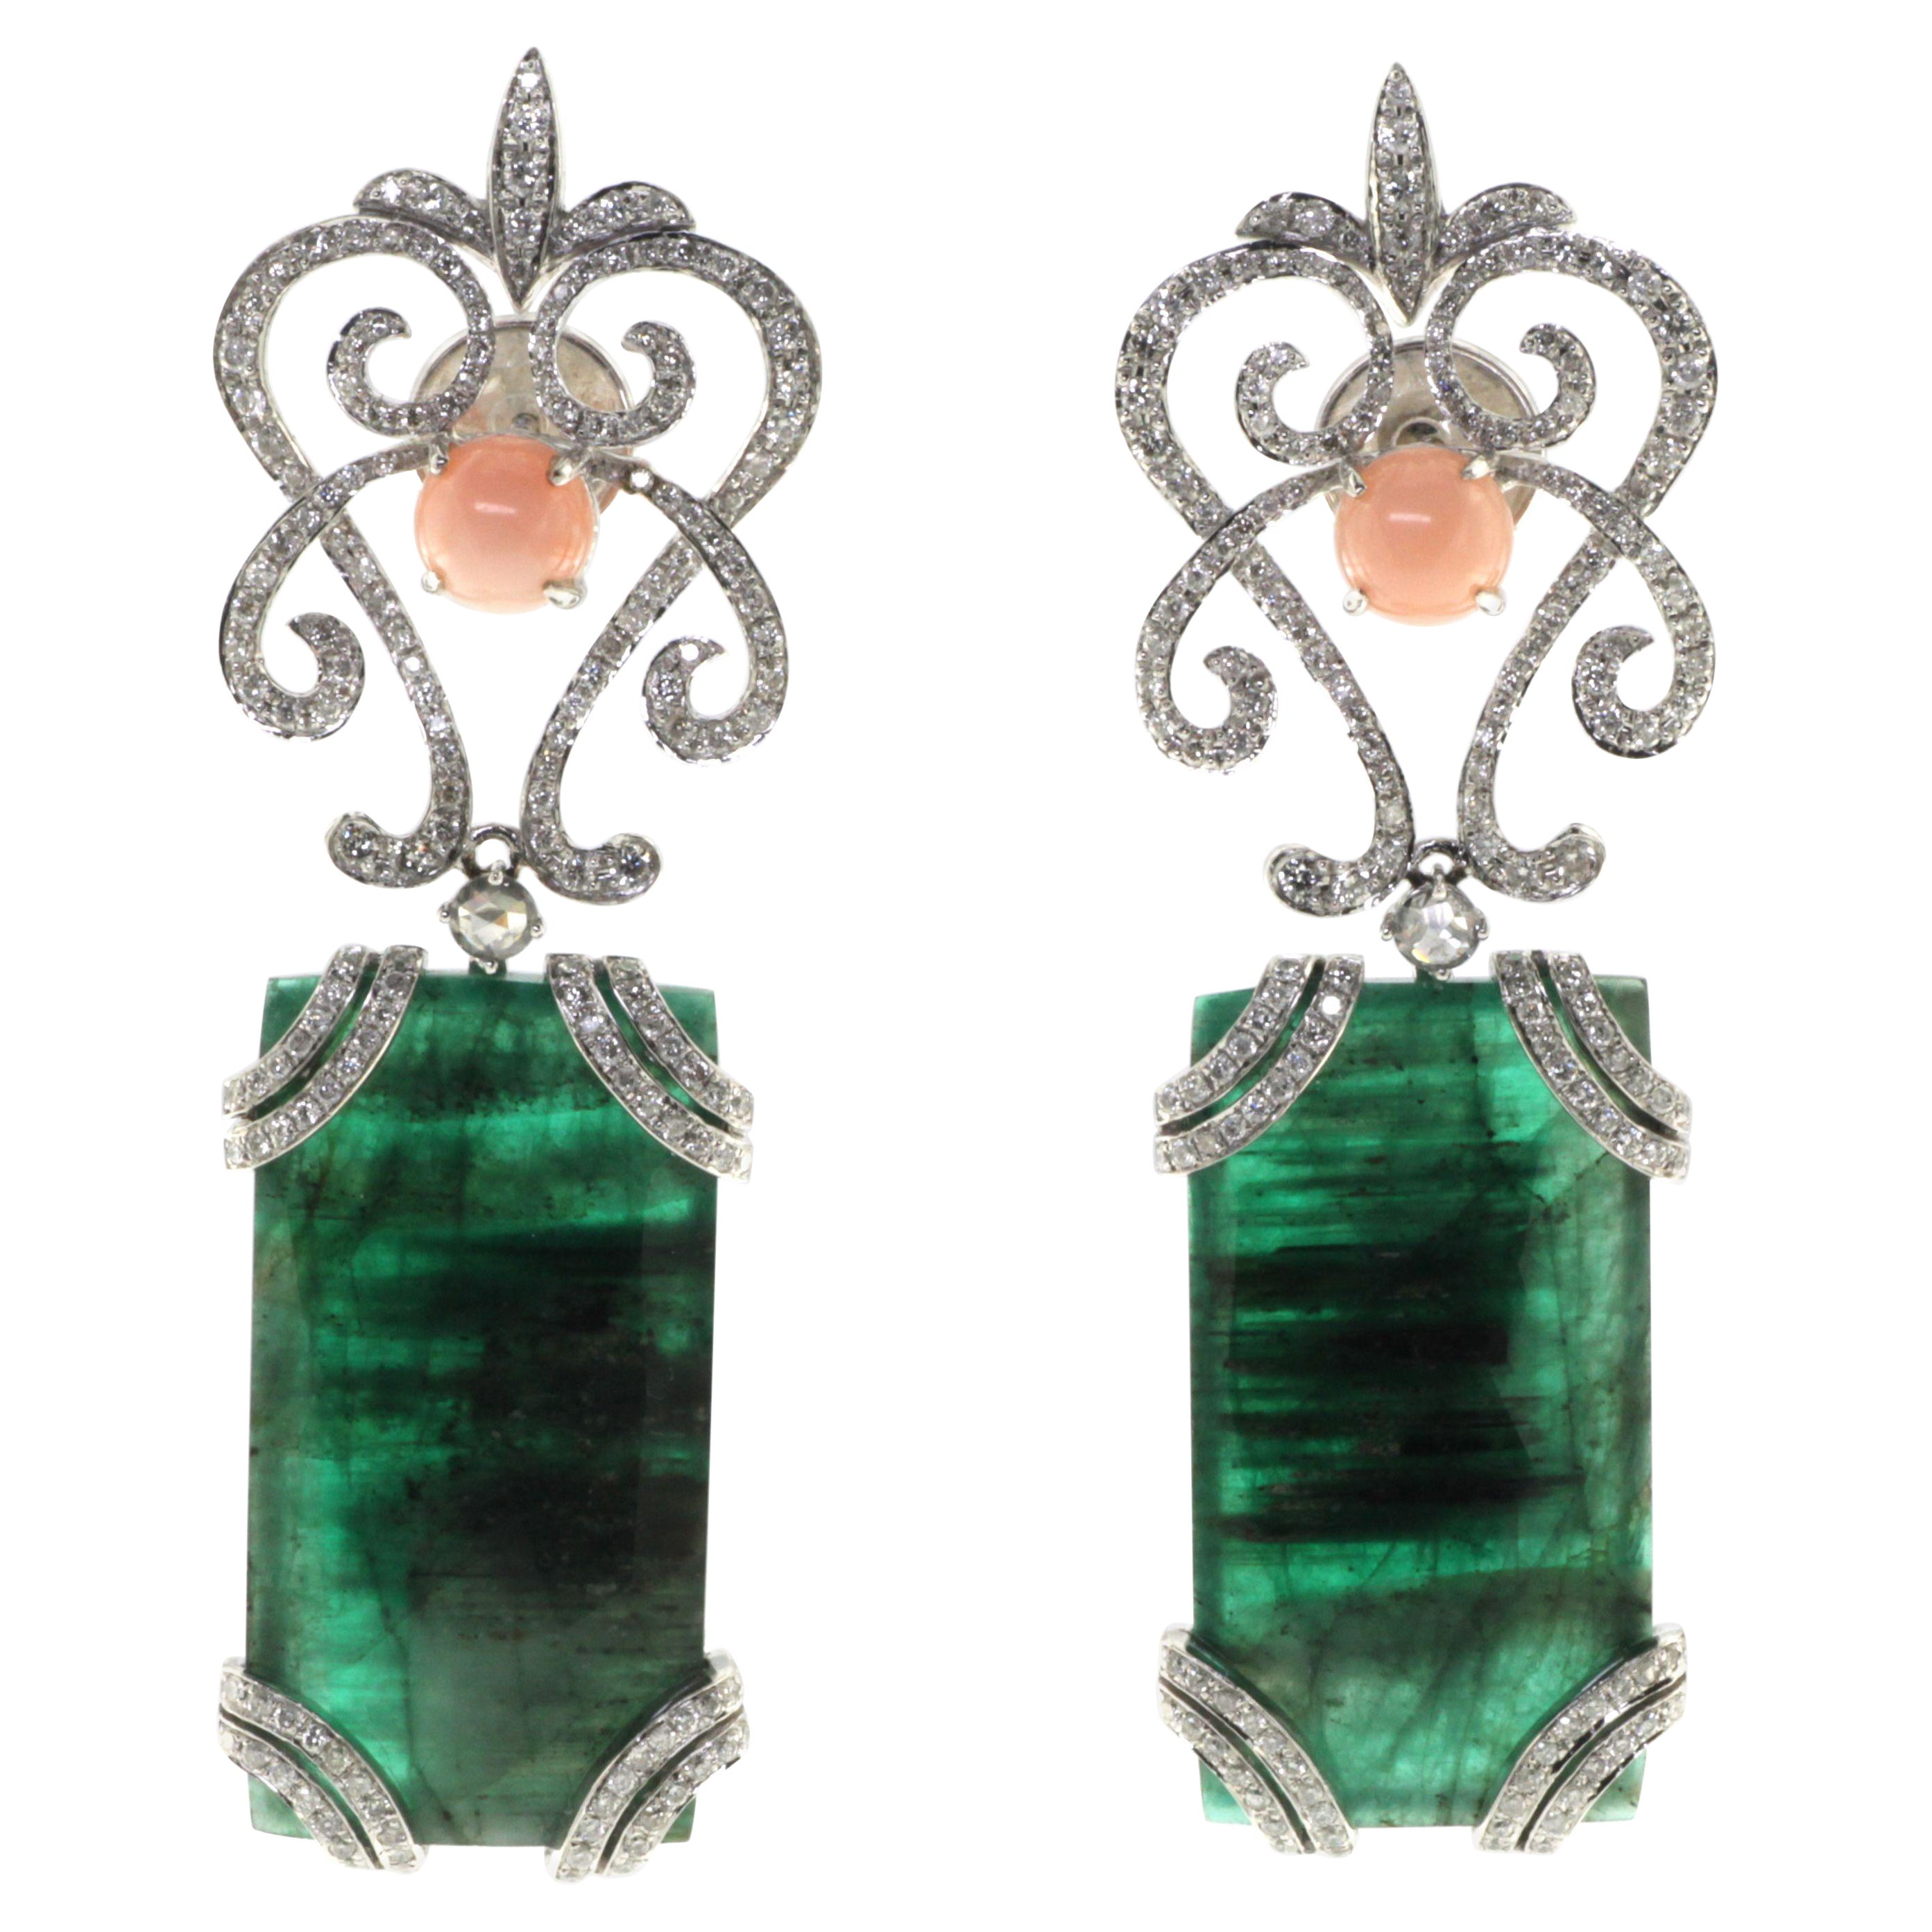  Vintage 25.07Ct Emerald Dangle Earring Diamonds Coral  And 18 Karat White Gold 